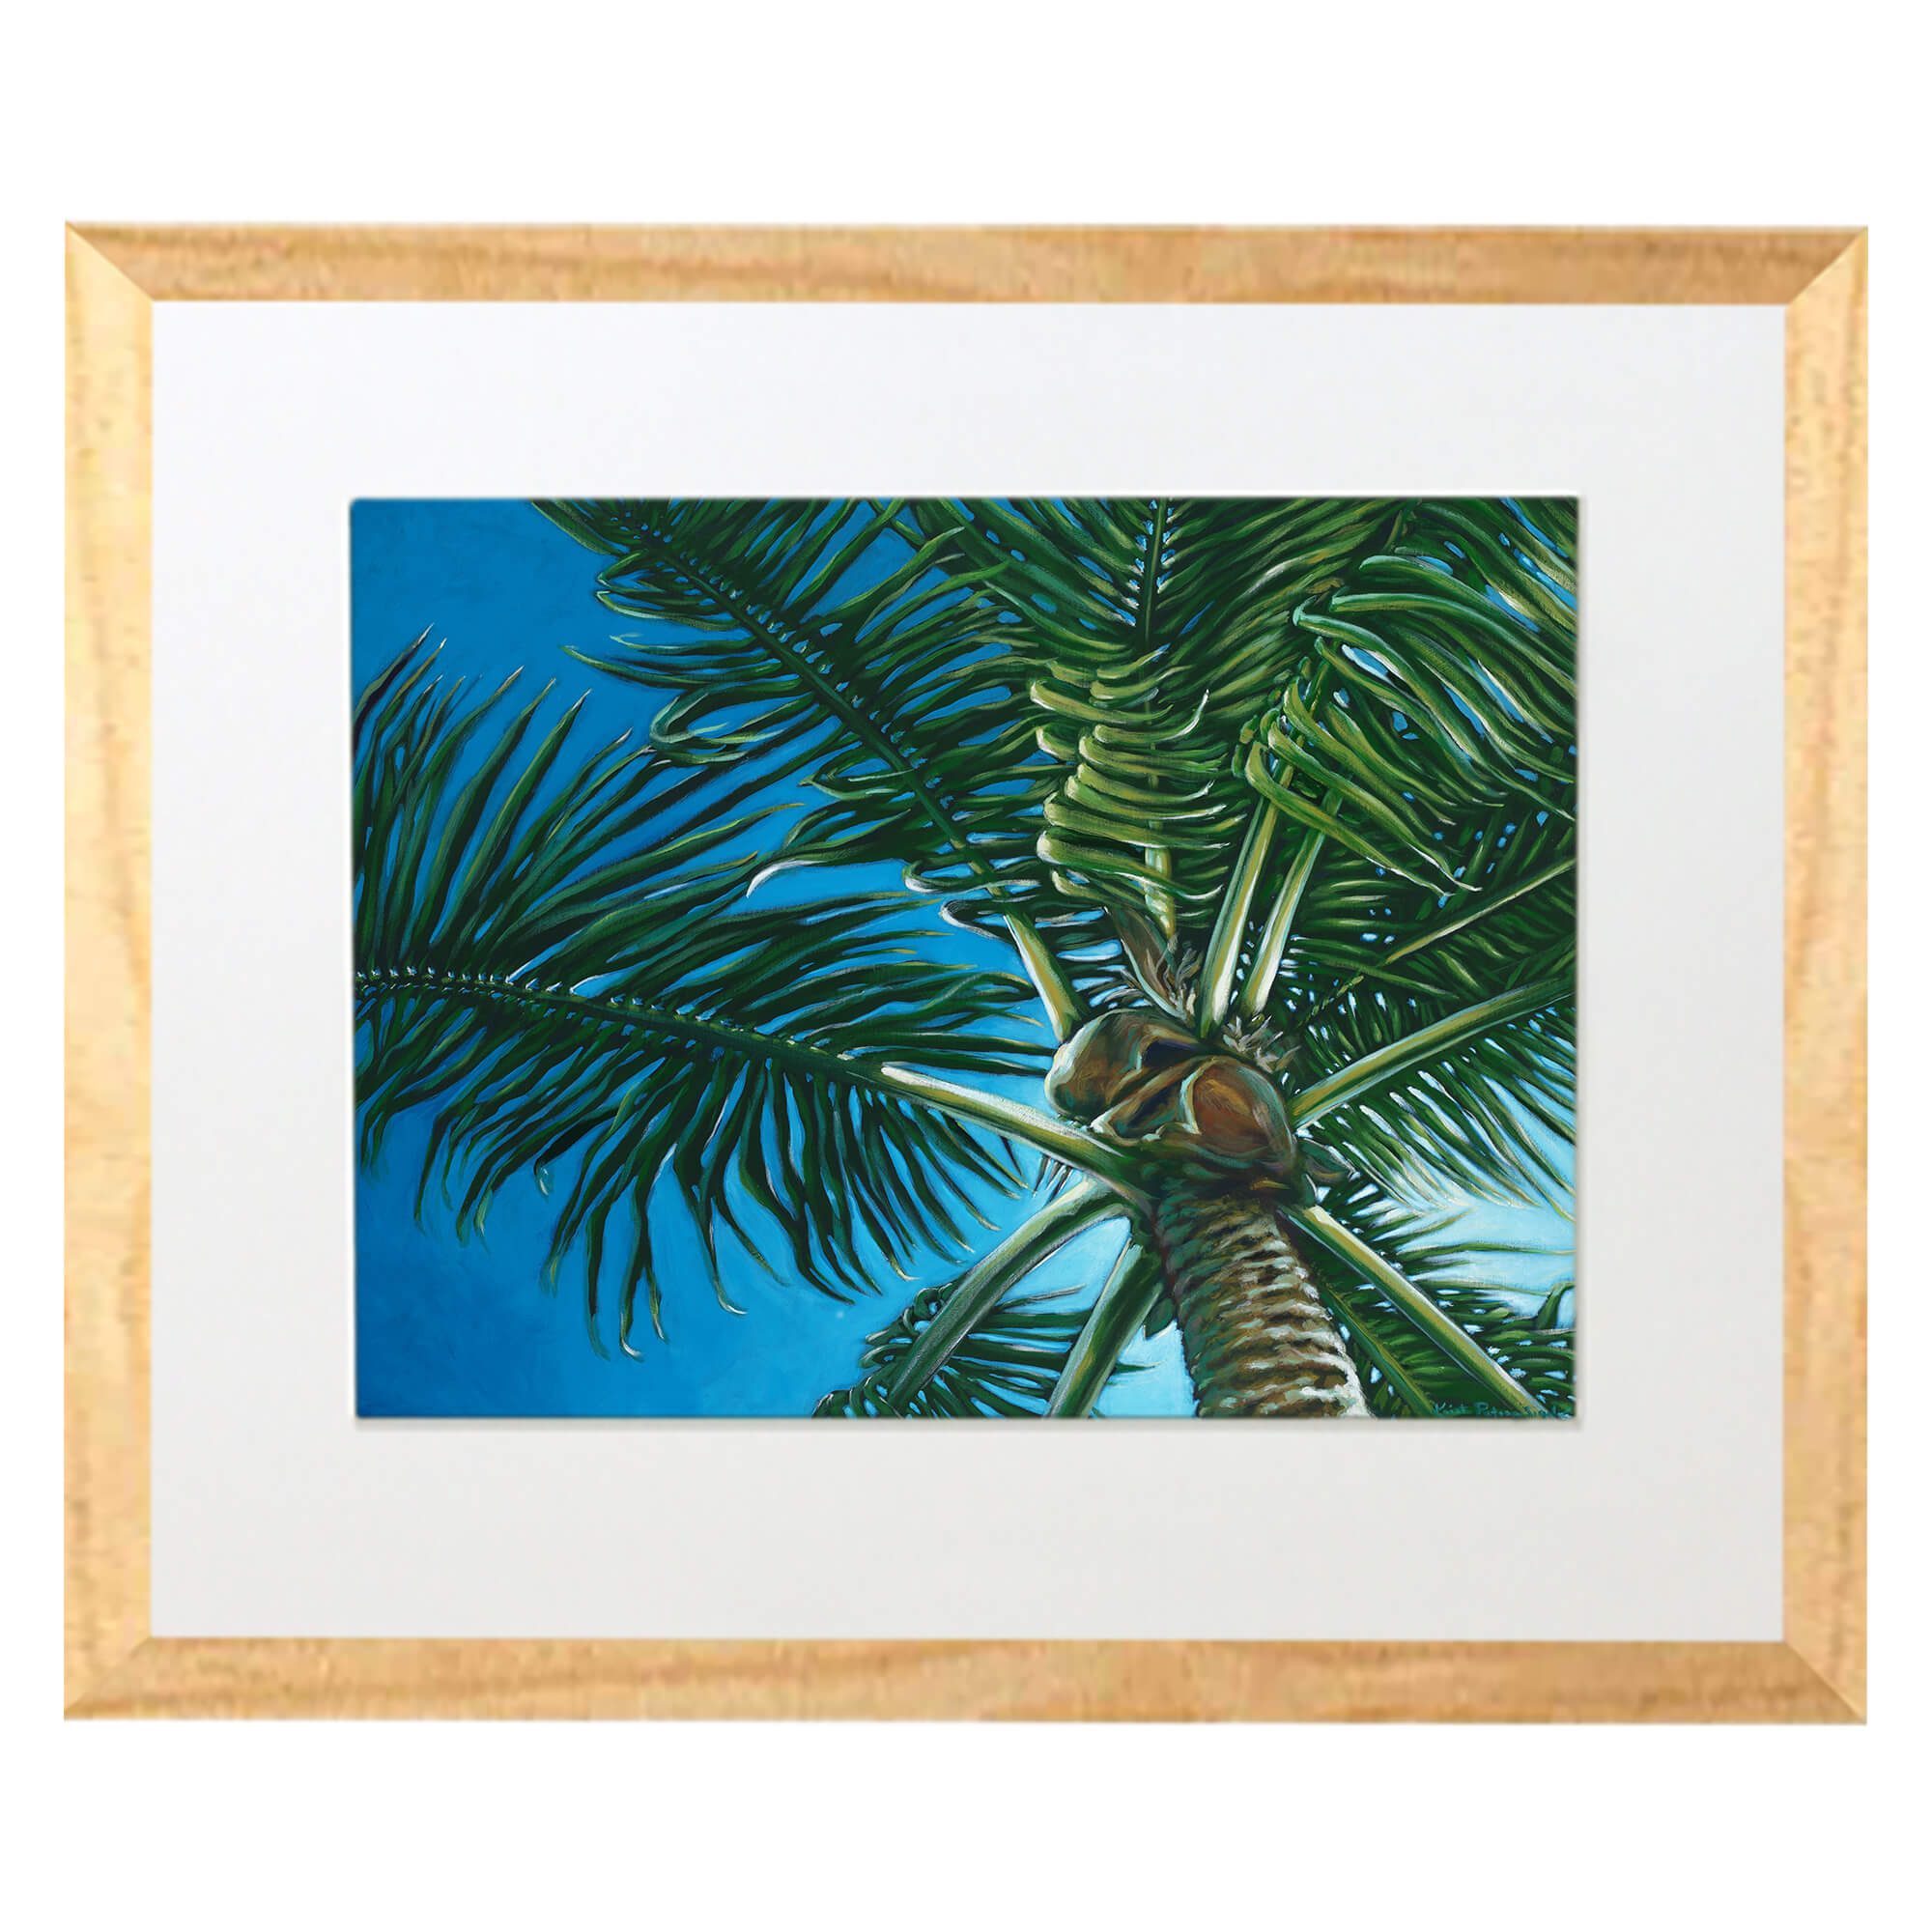 Matted art print with wood print featuring green leaves by hawaii artist Kristi Petosa